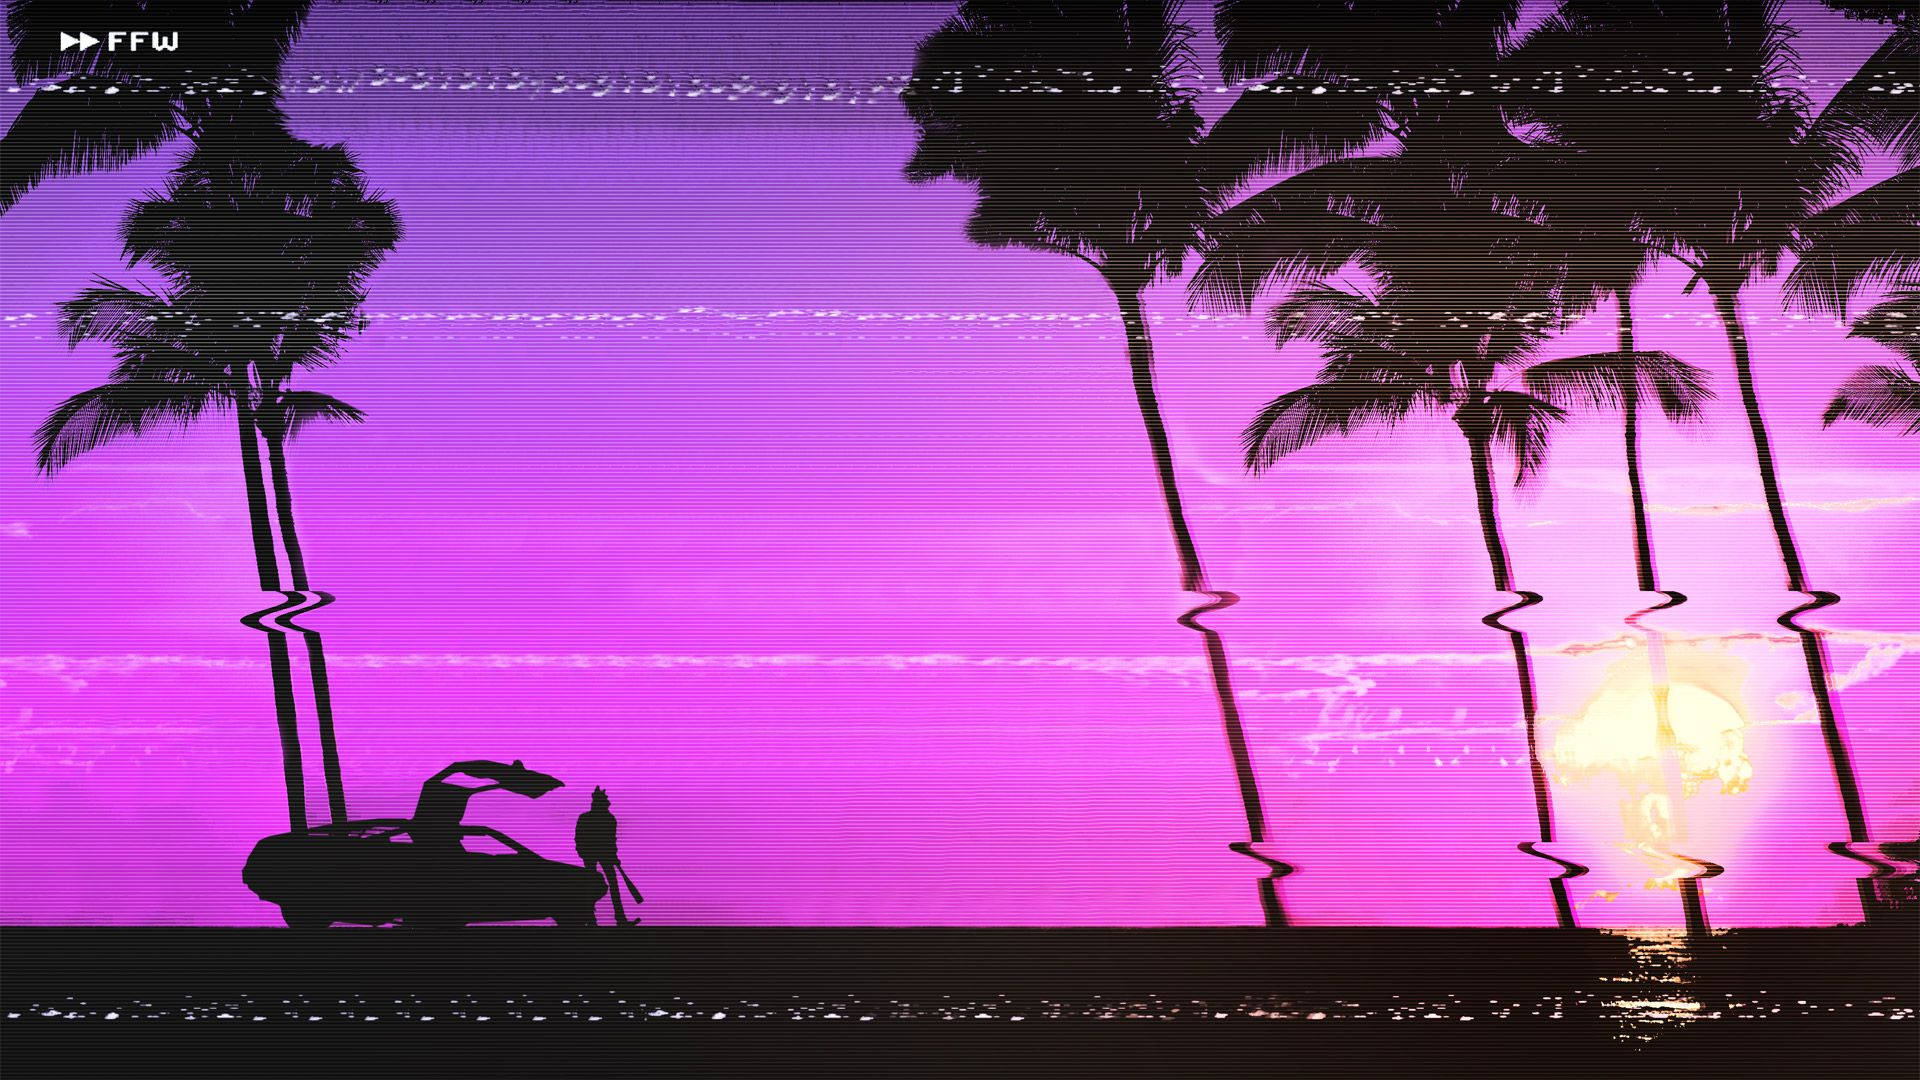 Hotline Miami 1920X1080 Wallpaper and Background Image